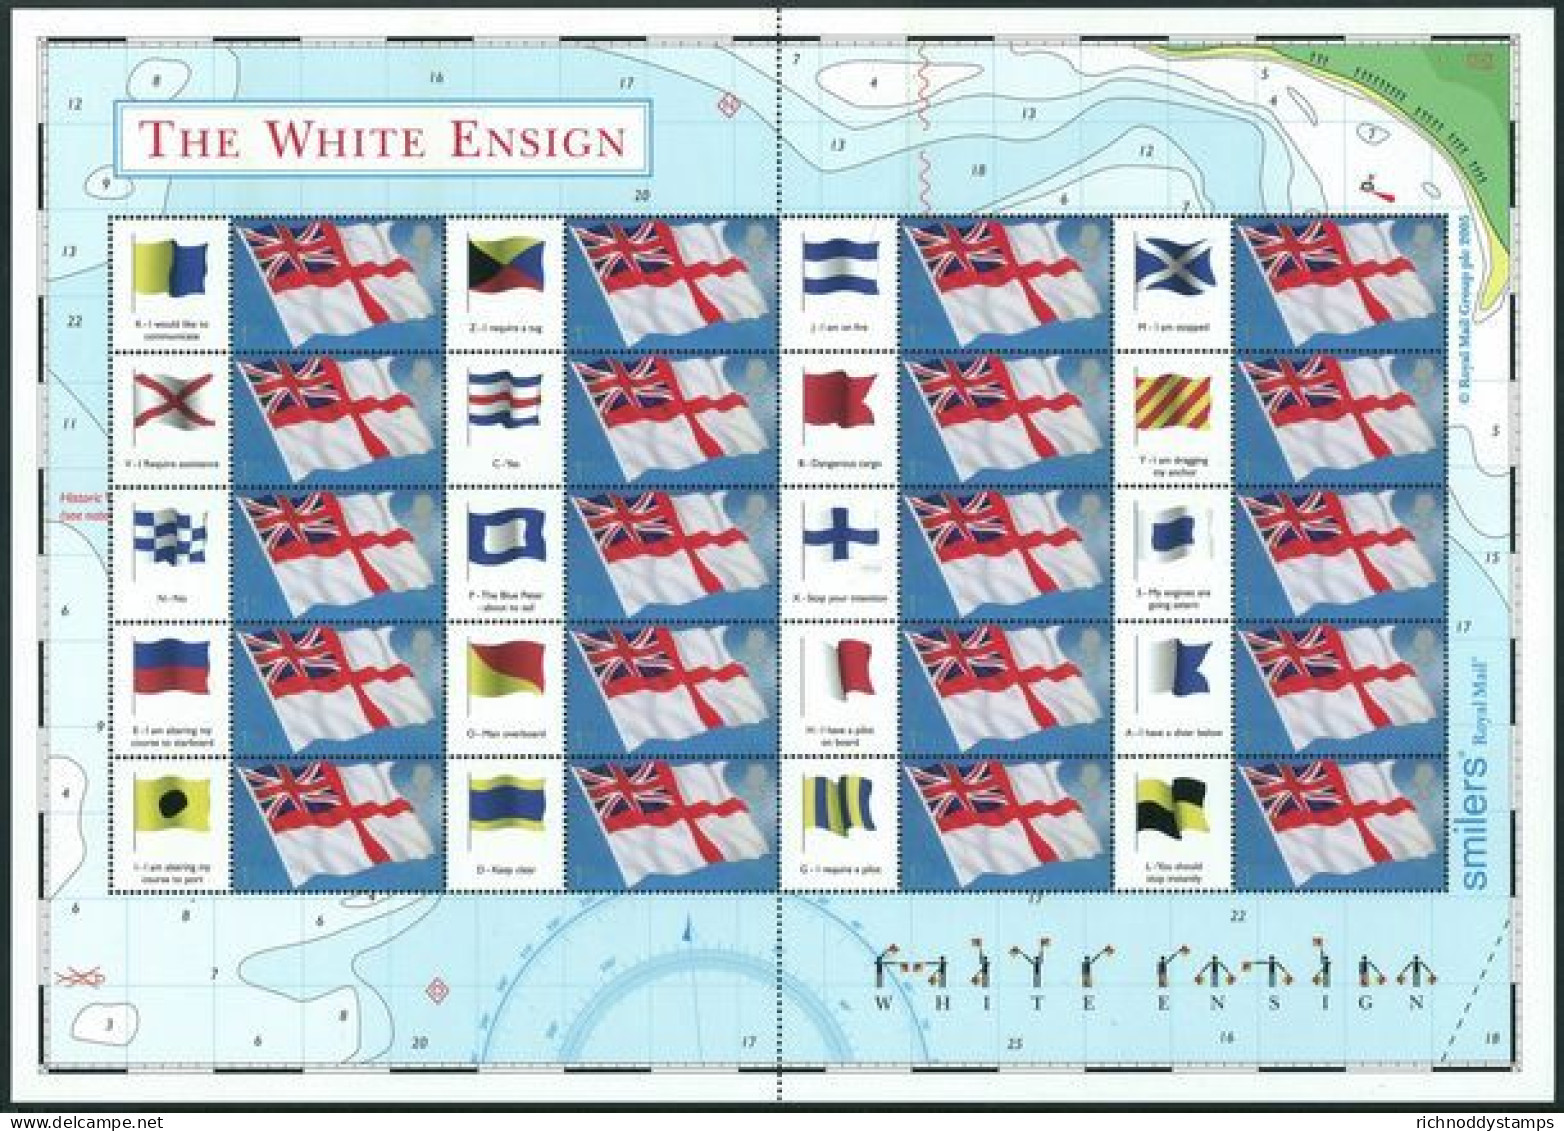 2005 The White Ensign Smilers Sheet Unmounted Mint.  - Smilers Sheets